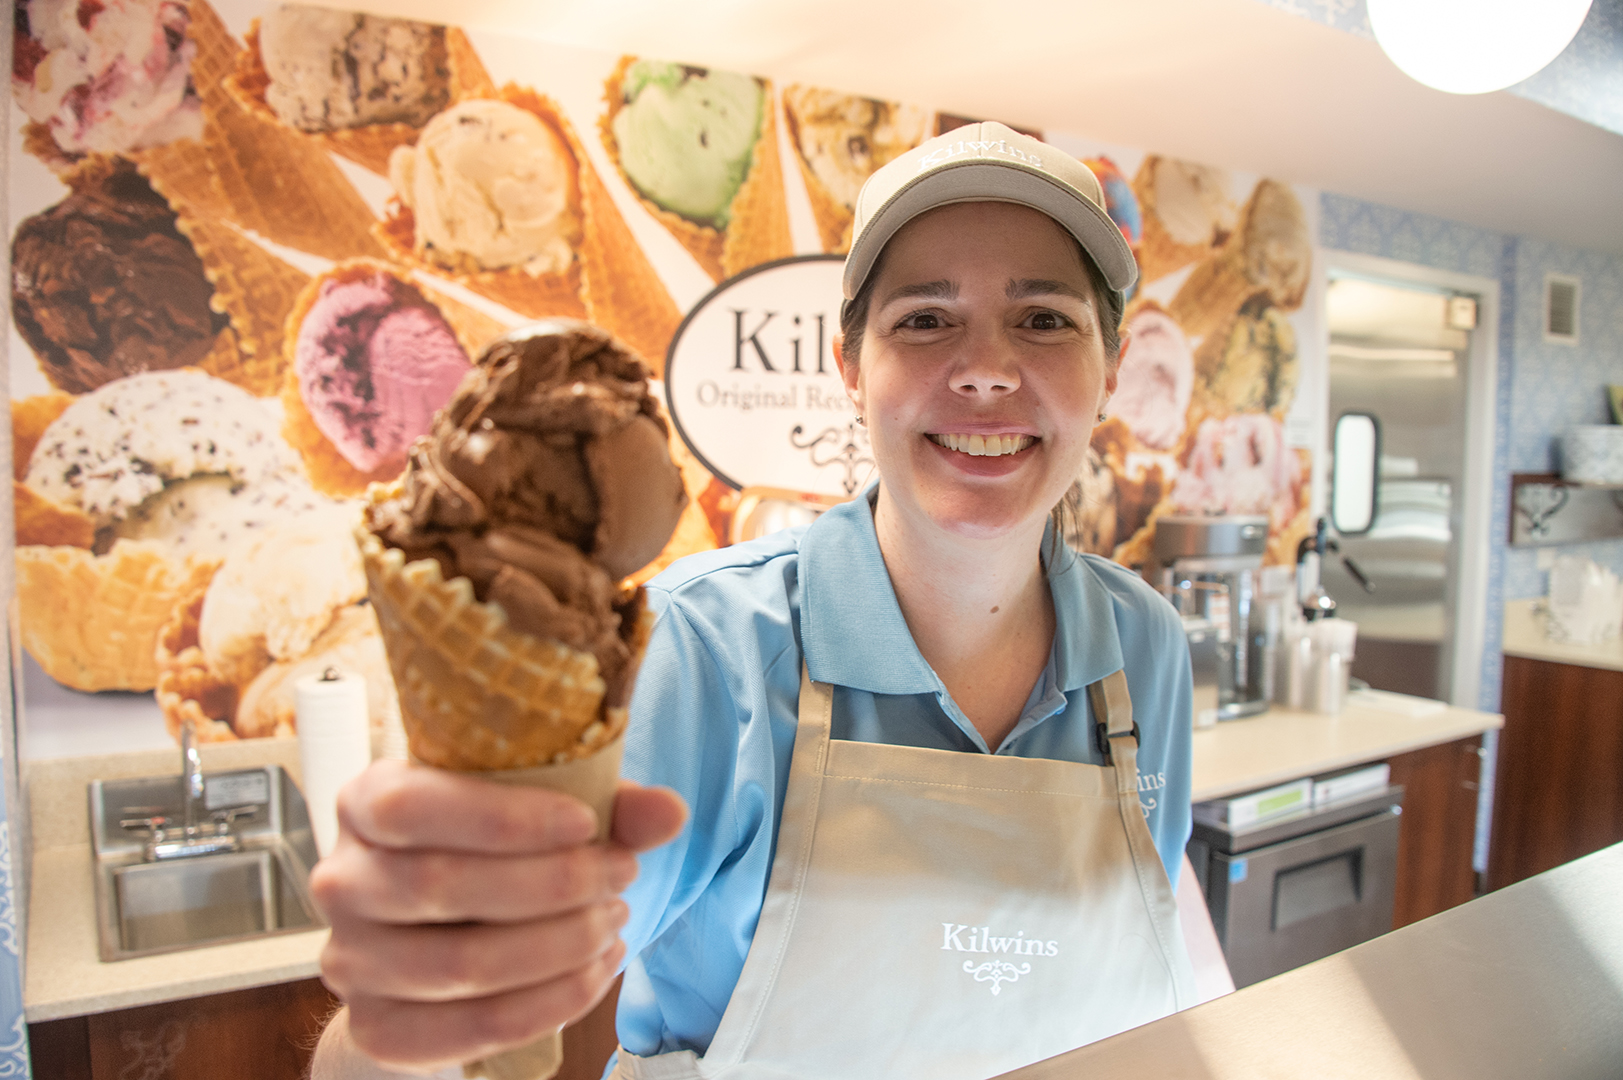 Picture of the owner of the Arlington Heights store with an ice cream cone